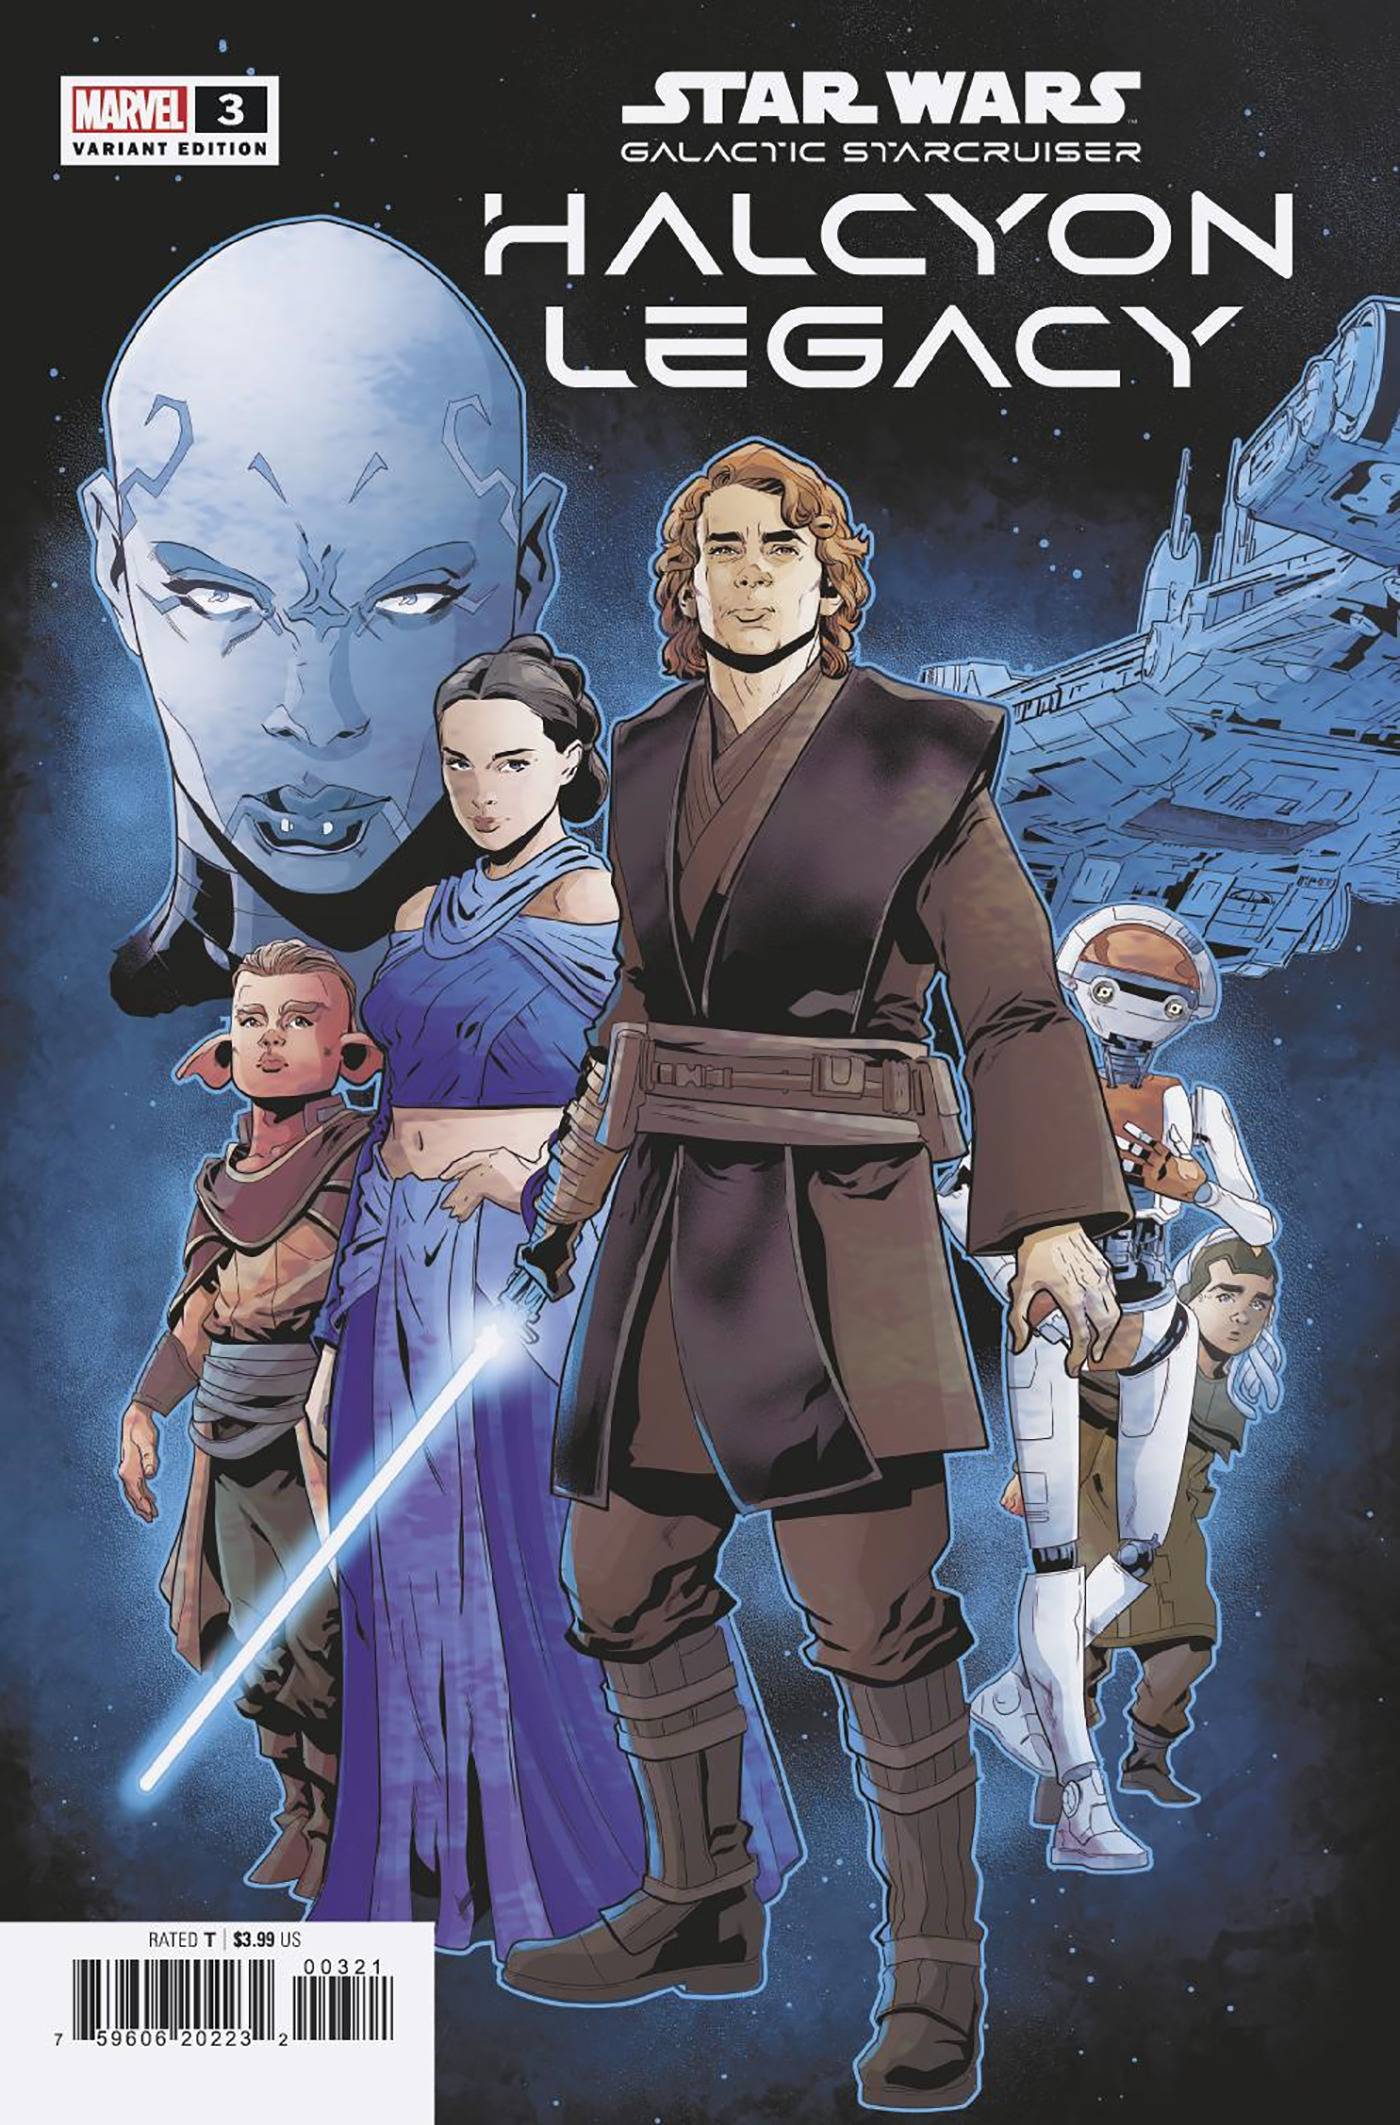 STAR WARS HALCYON LEGACY #3 (OF 5) SLINEY CONNECTING VAR